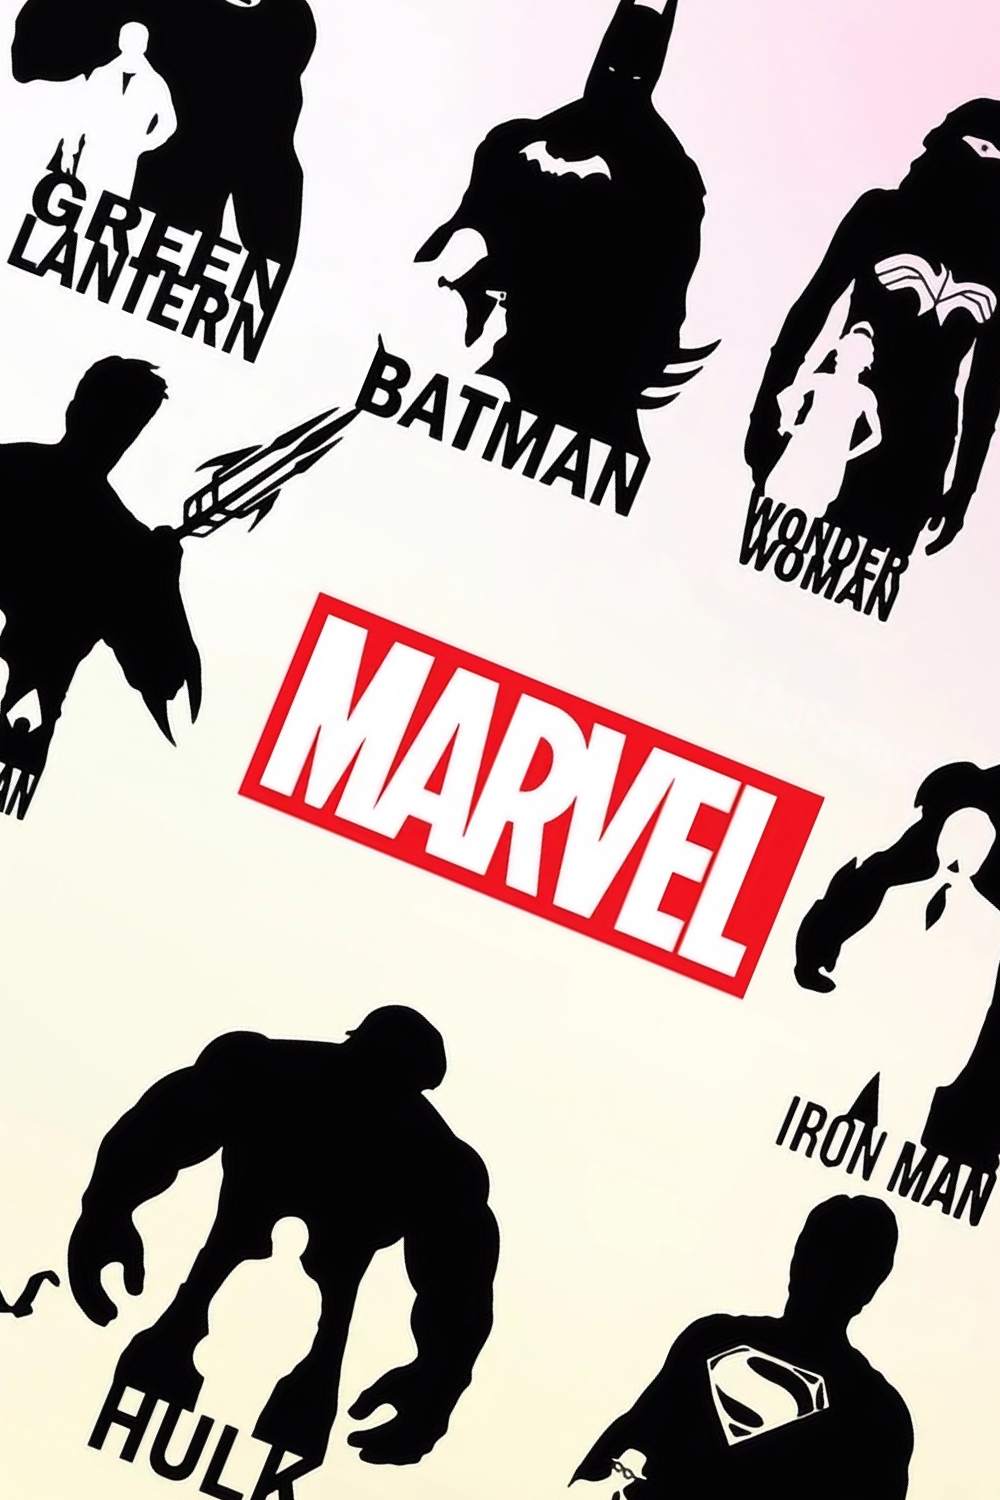 Various superheroes from the Marvel Cinematic Universe.